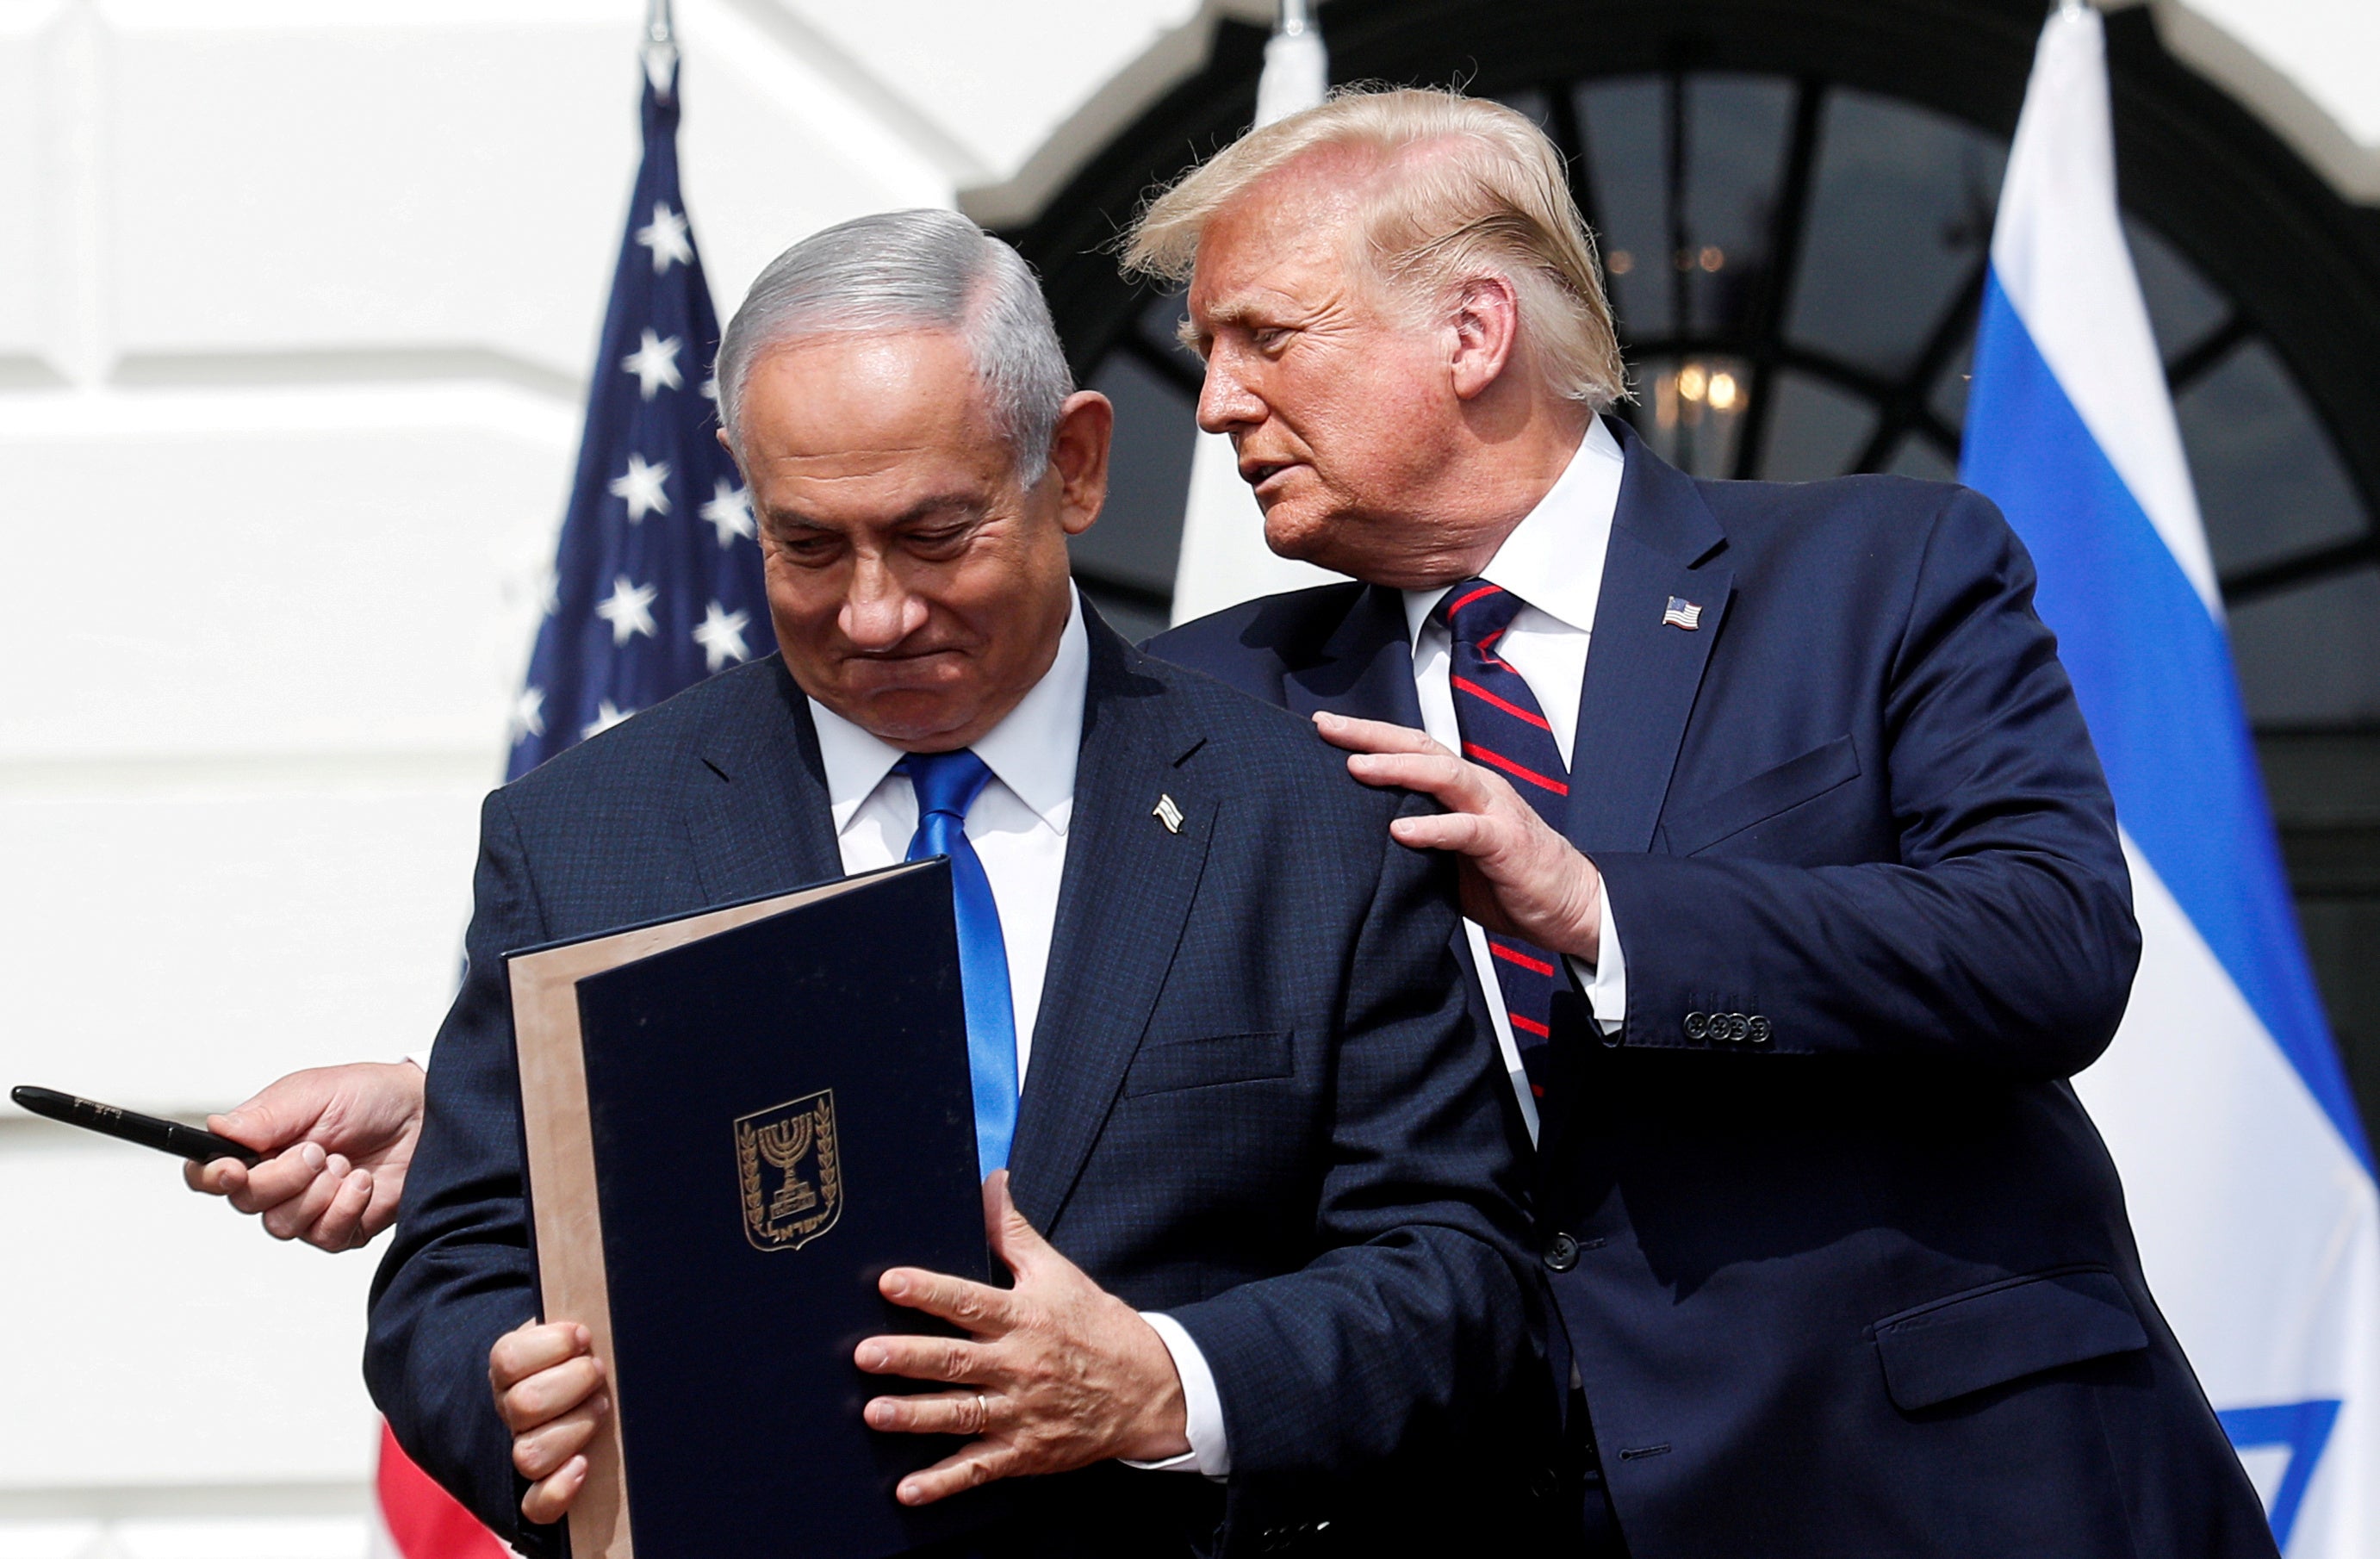 Trump hosts leaders, including Benjamin Netanyahu, for the Abraham Accords signing ceremony at the White House in Washington in September